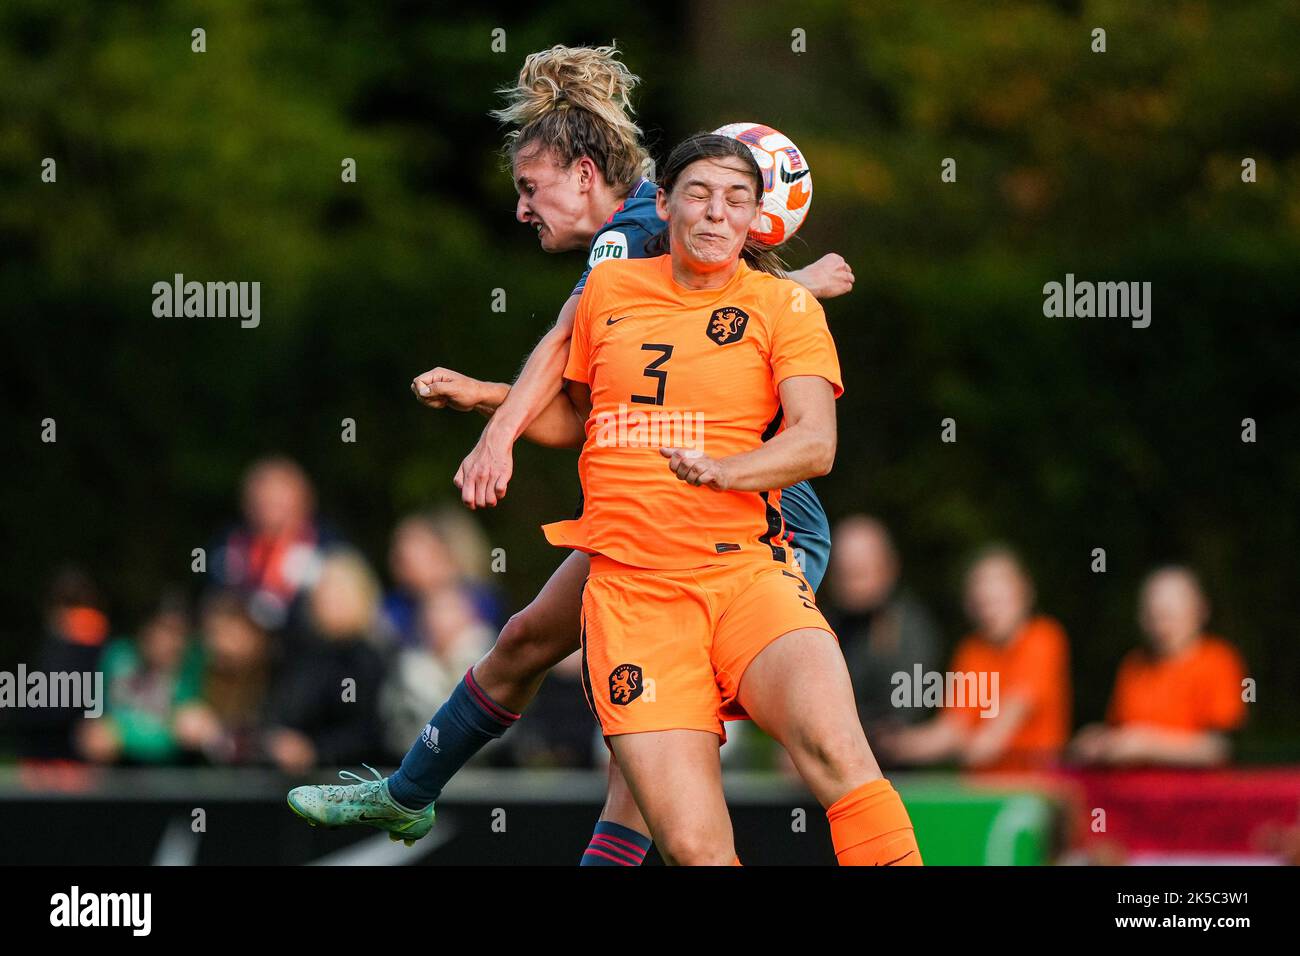 Zeist - Maxime Bennink of Feyenoord V1, Aniek Nouwen of Holland women during the match between Oranje Vrouwen v Feyenoord V1 at KNVB Campus on 7 October 2022 in Zeist, Netherlands. (Box to Box Pictures/Tom Bode) Stock Photo